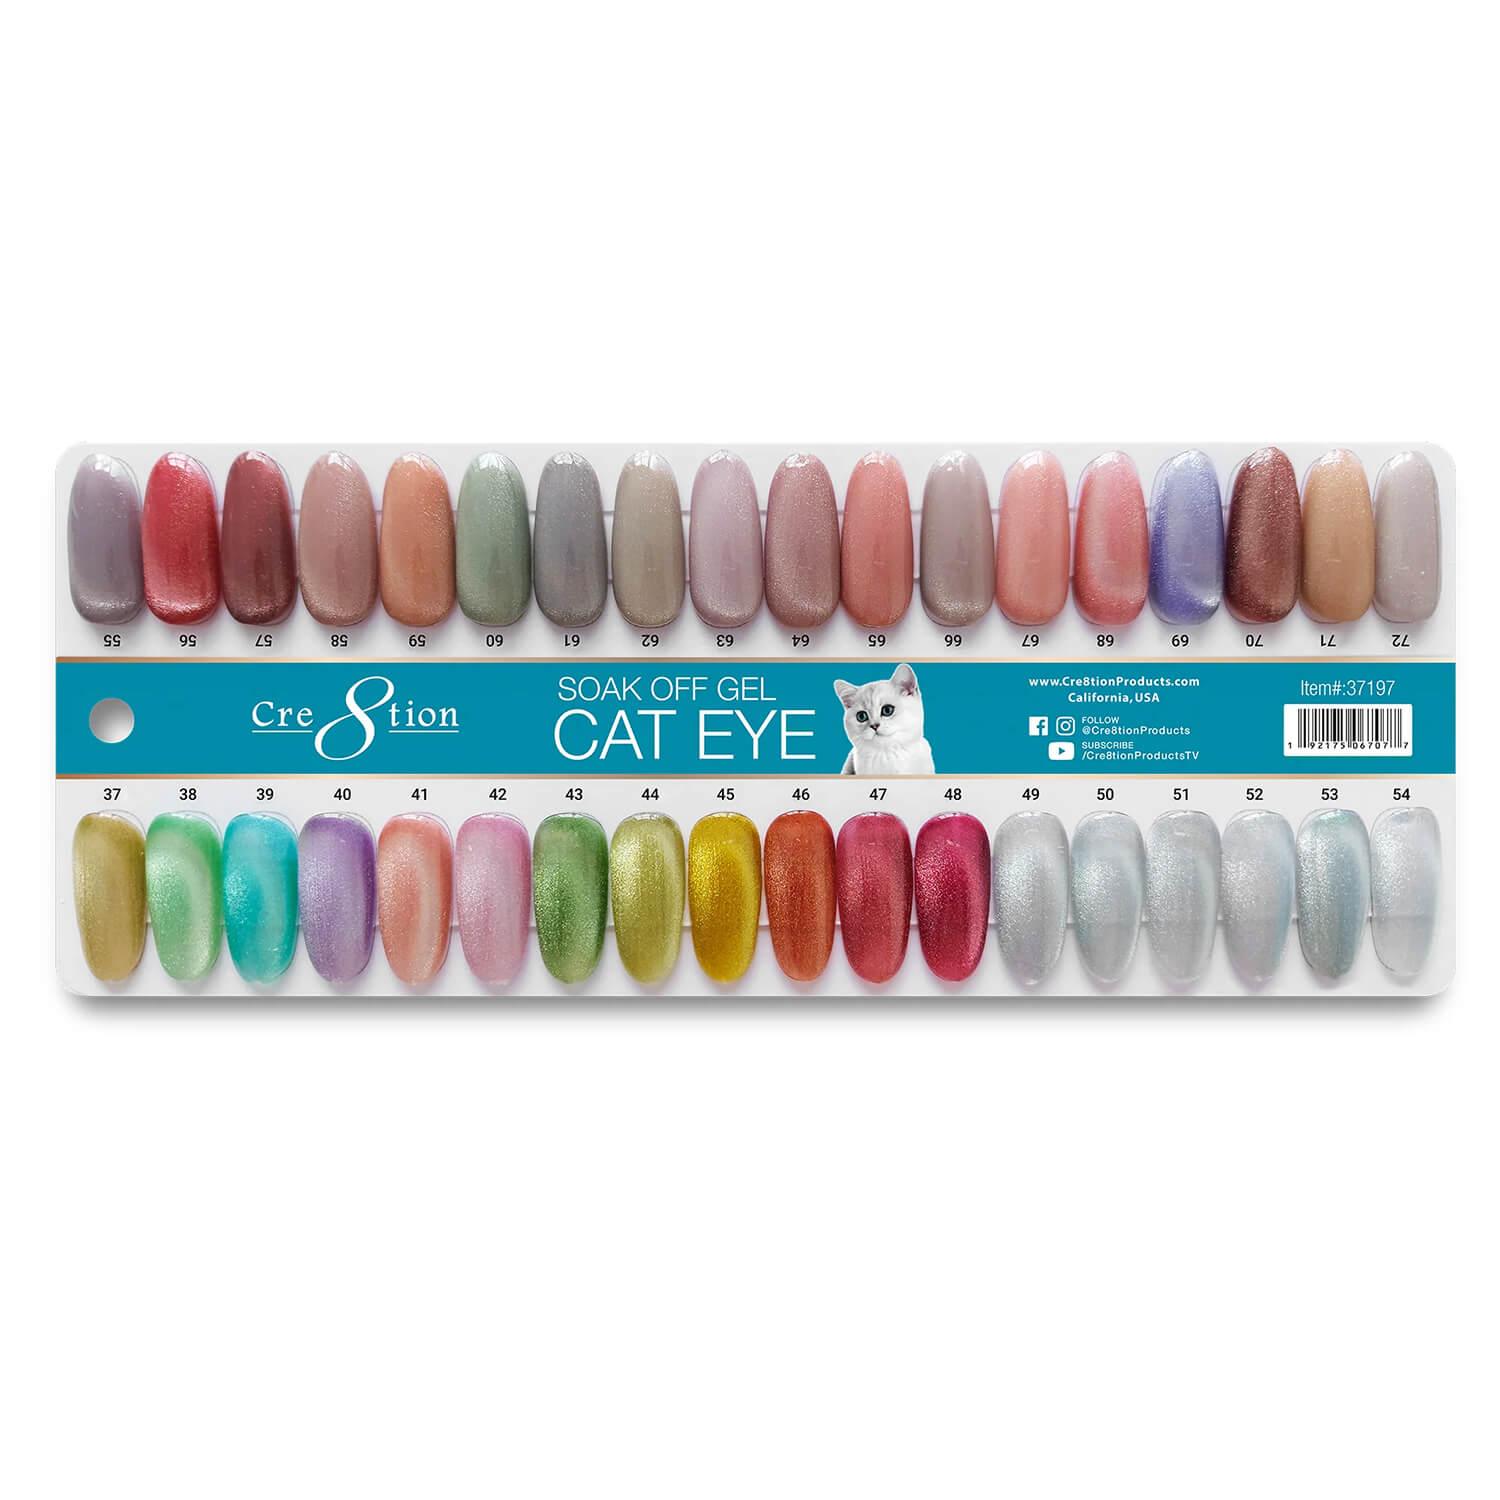 Cre8tion Gel Cat Eye 0.5 Oz (Pack of 36 Colors) #37 --> #72 + Free Color Chart